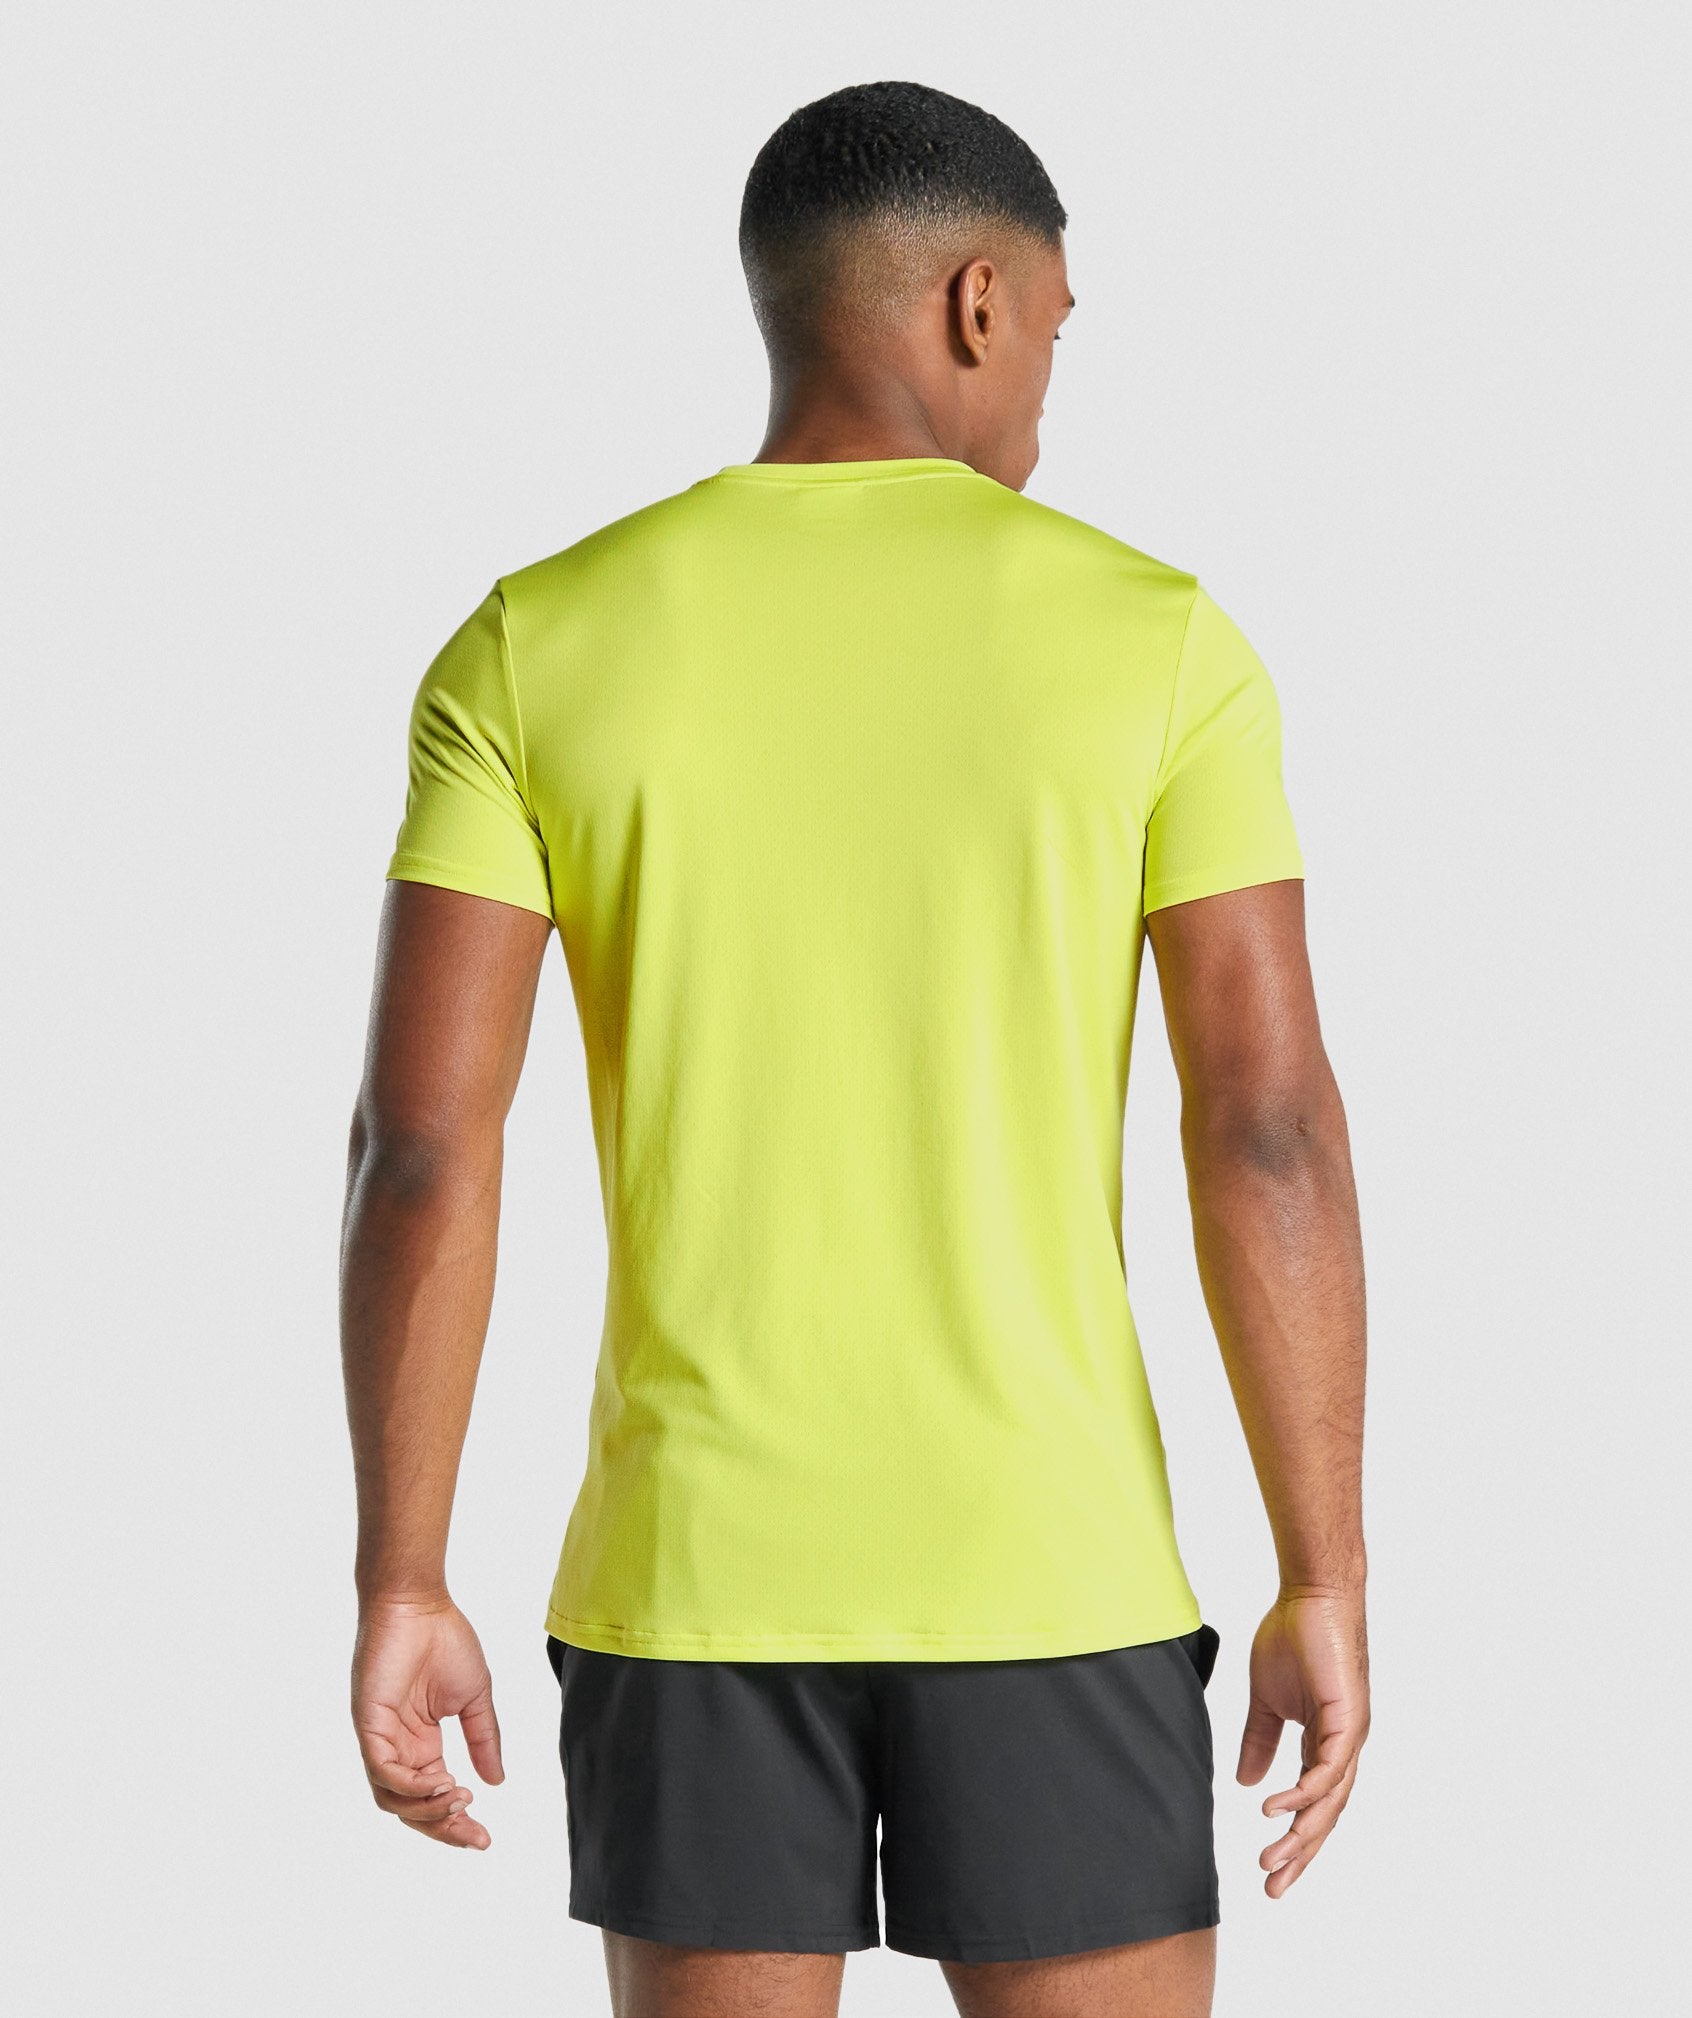 Arrival Graphic T-Shirt in Yellow - view 2